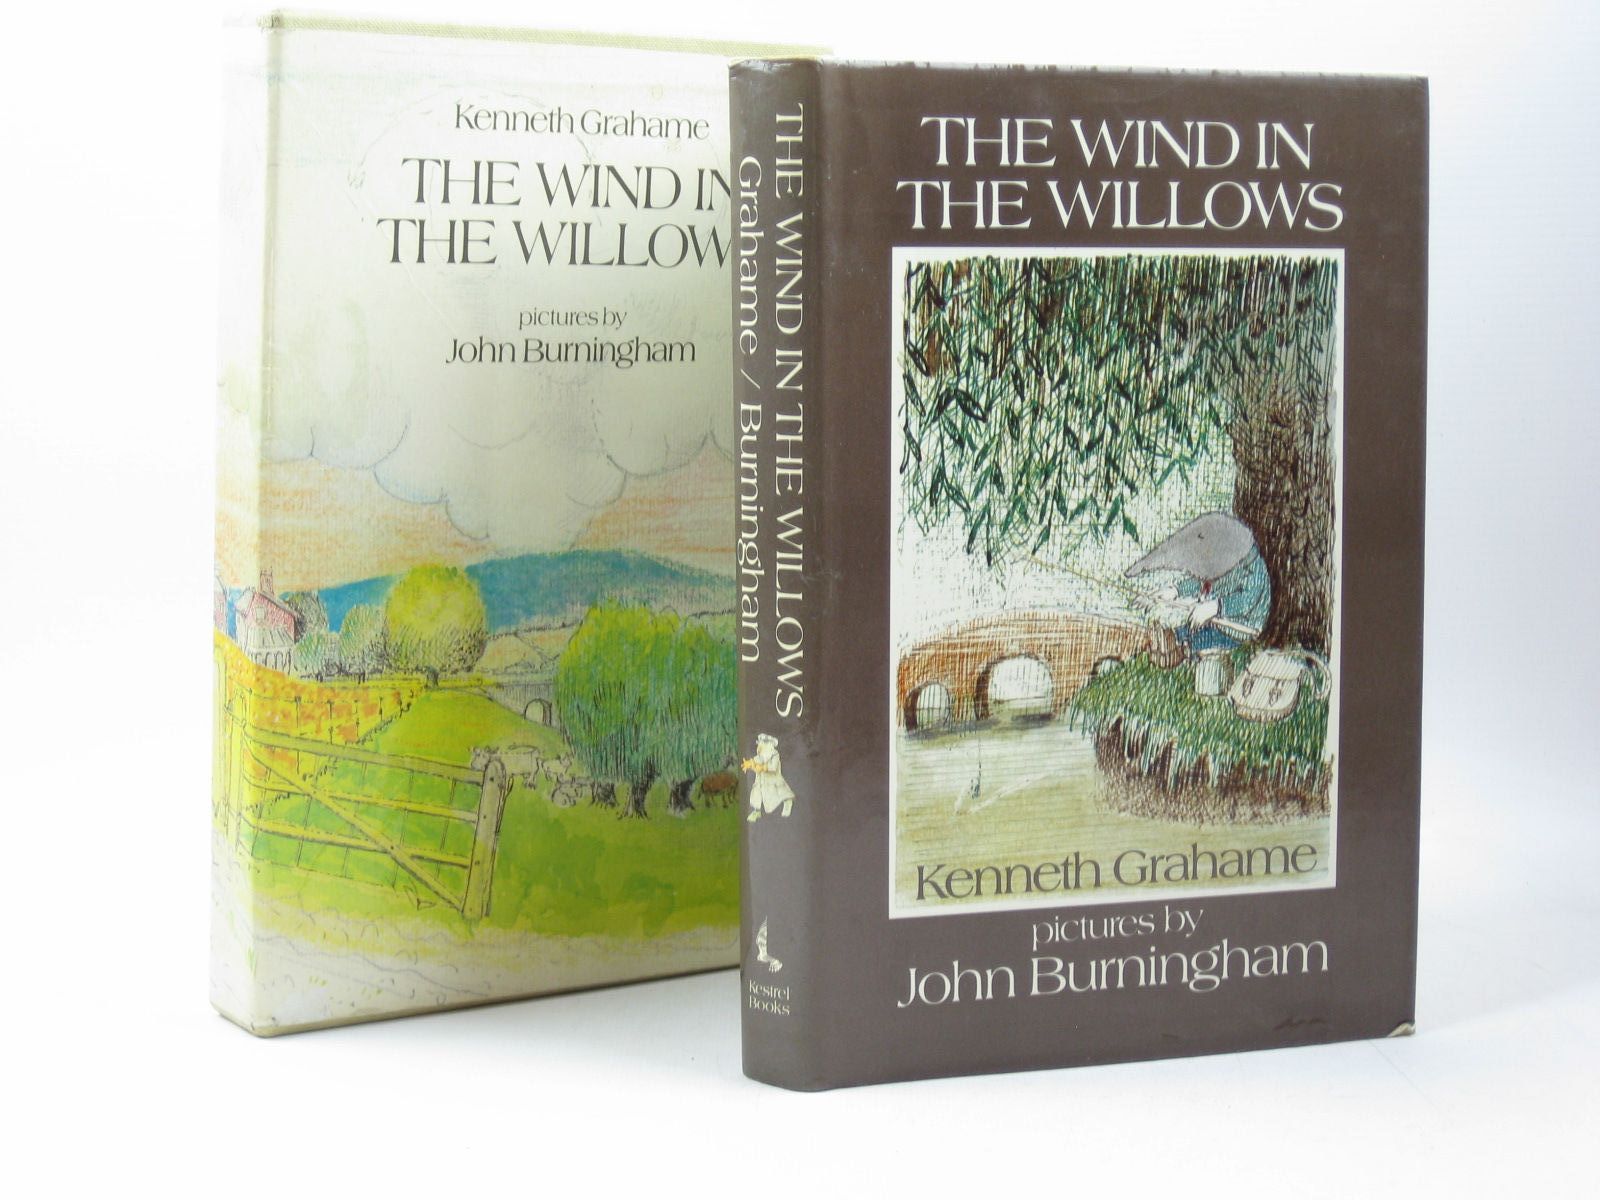 Photo of THE WIND IN THE WILLOWS written by Grahame, Kenneth illustrated by Burningham, John published by Kestrel Books (STOCK CODE: 1313346)  for sale by Stella & Rose's Books